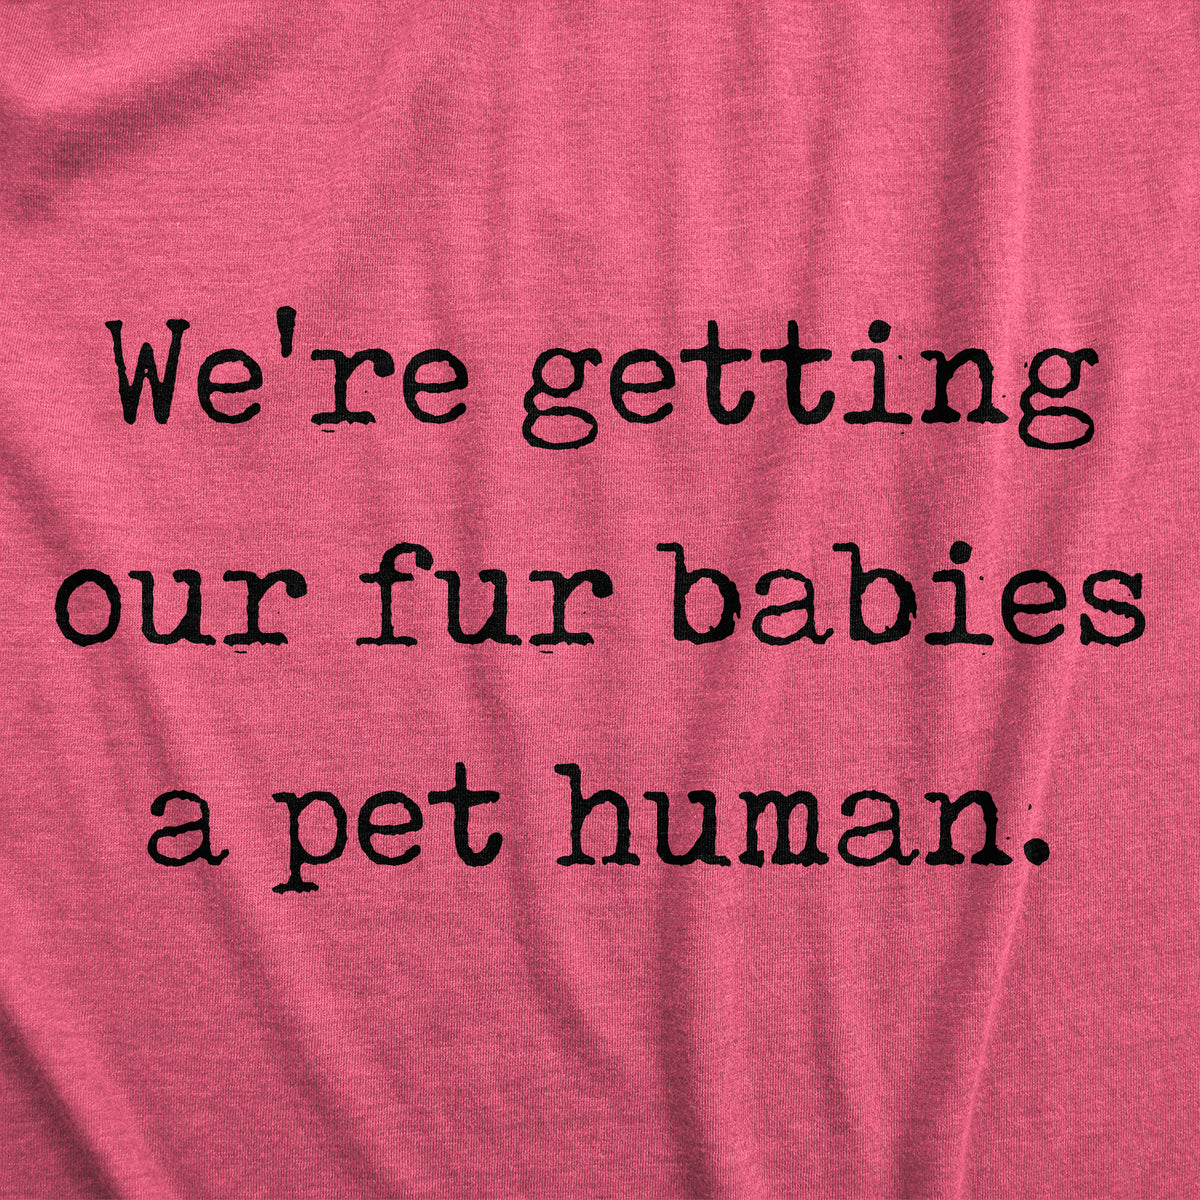 We’re Getting Our Fur Babies A Pet Human Maternity T Shirt